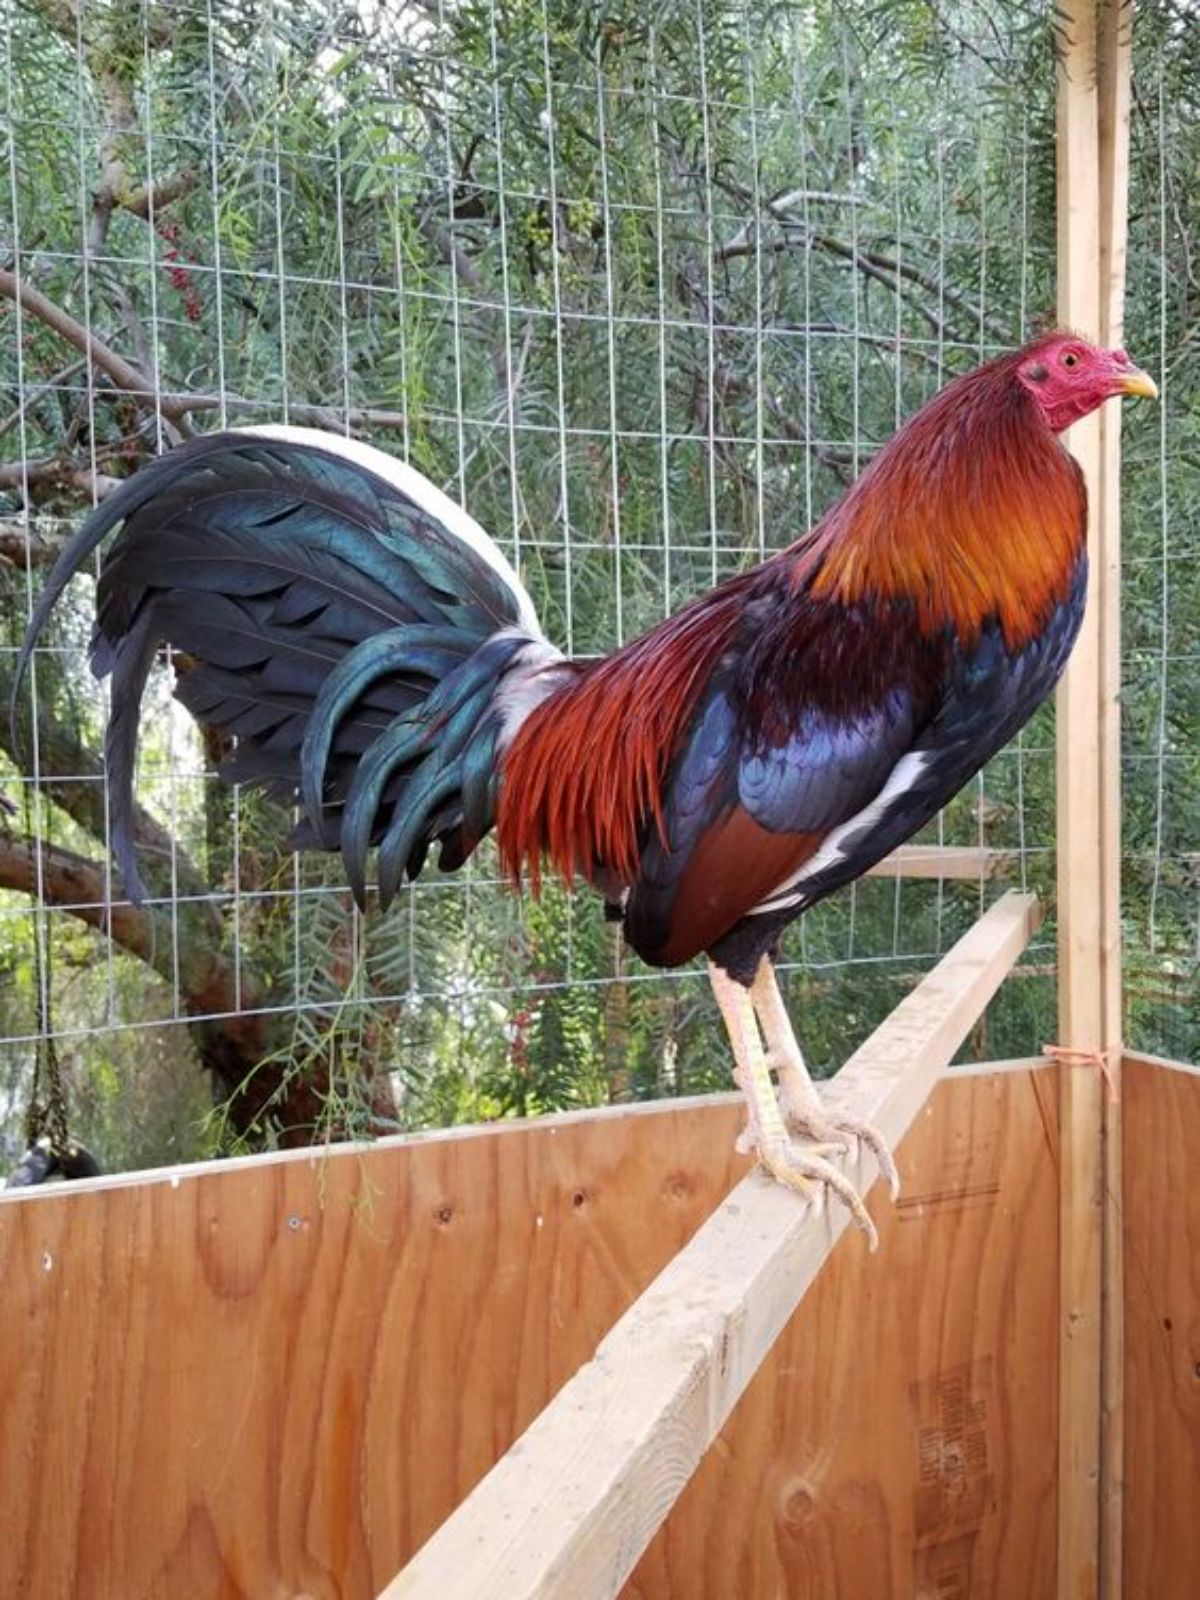 A brown Spanish Game rooster perched on a wooden board.